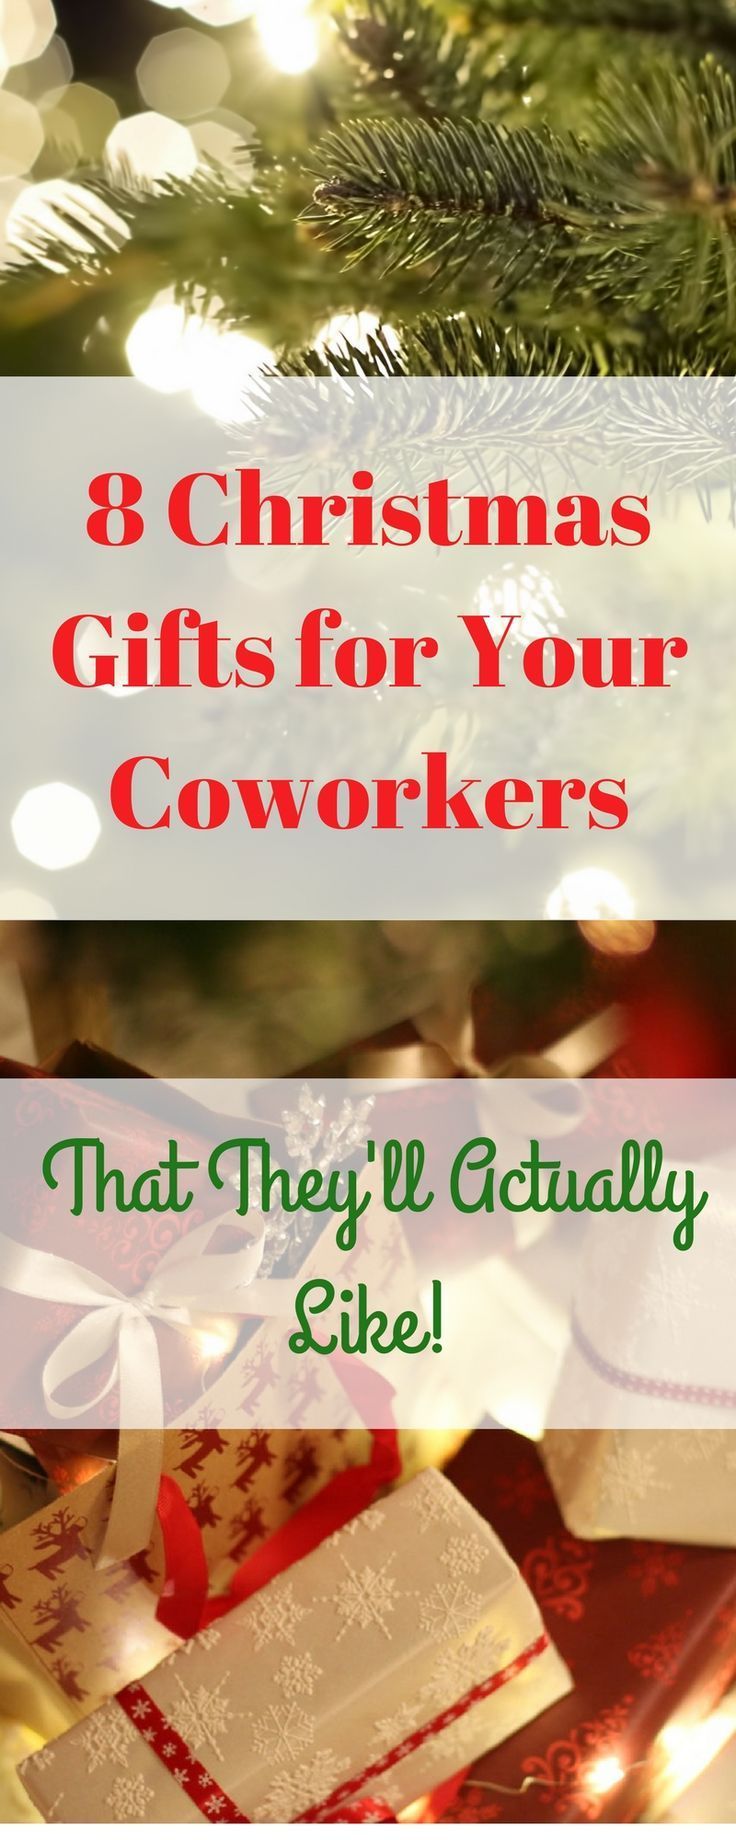 8 Christmas Gifts For Your Coworkers | The Arrow -   19 xmas gifts for coworkers cheap ideas